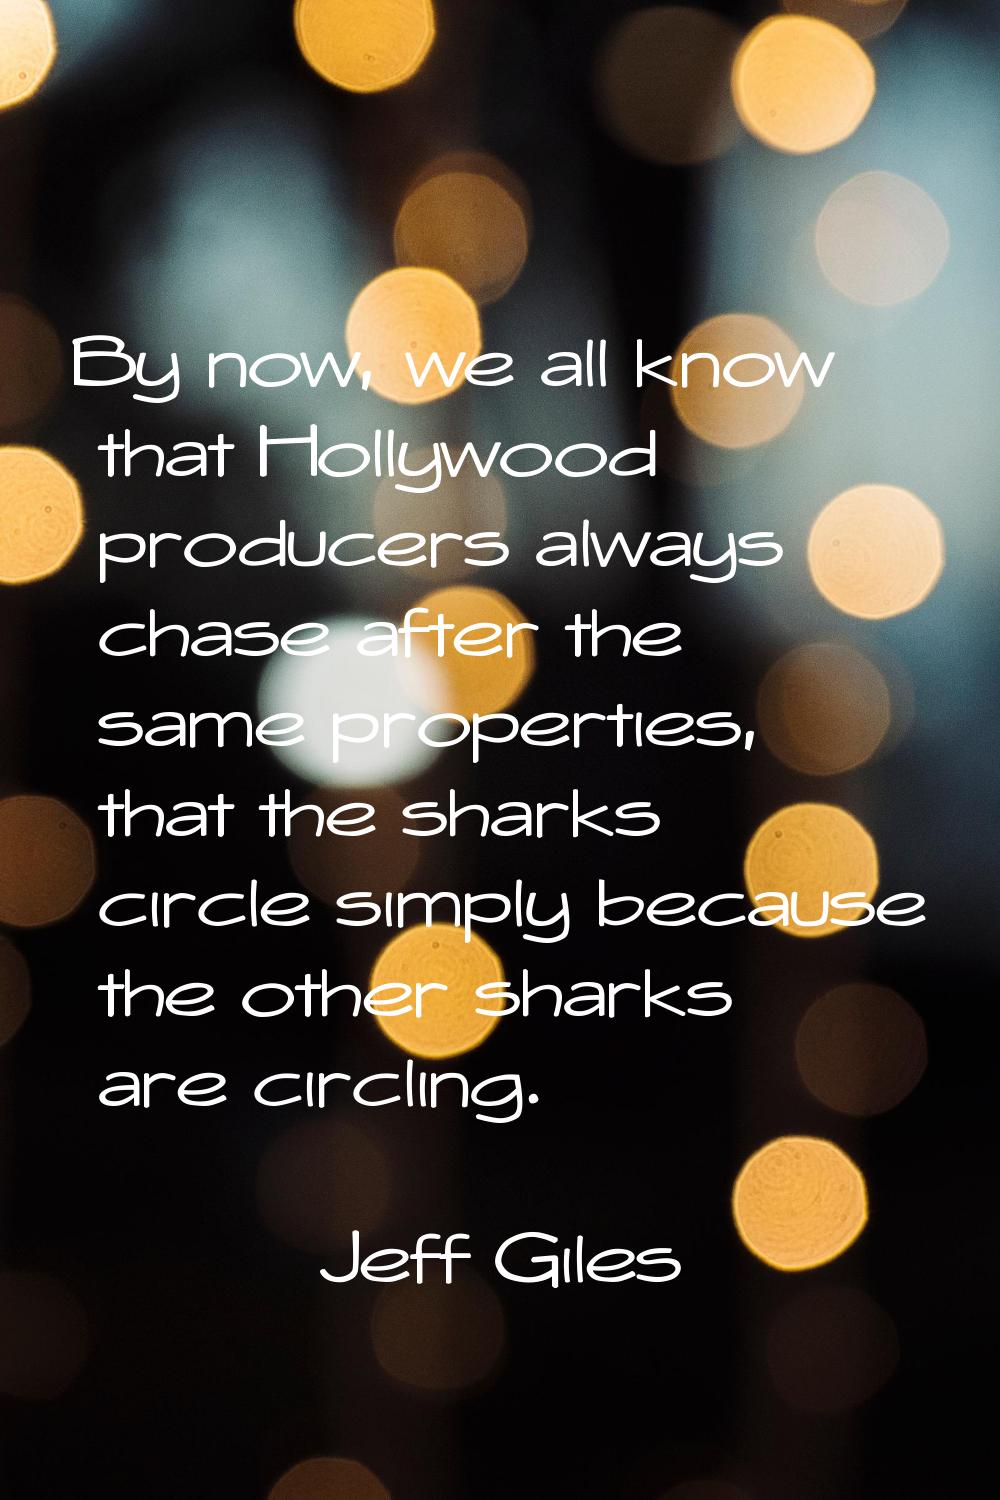 By now, we all know that Hollywood producers always chase after the same properties, that the shark